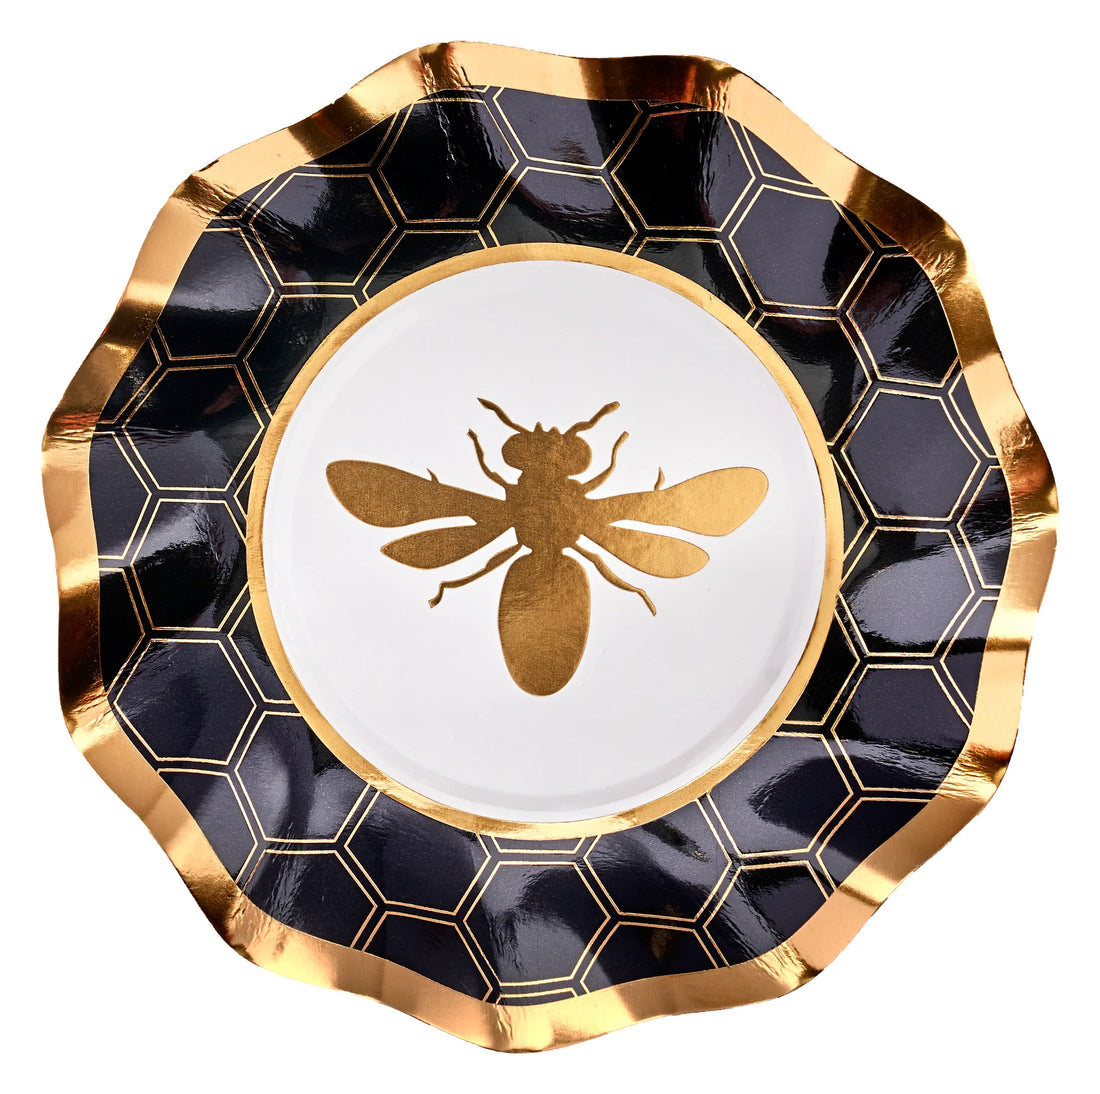 HoneyBee Paper Appetizer &amp; Dessert Bowls - 8 per package, featuring a ruffled edge design with a metallic gold rim. Perfect for adding elegance to events. Bee motif on a gold oval plate.